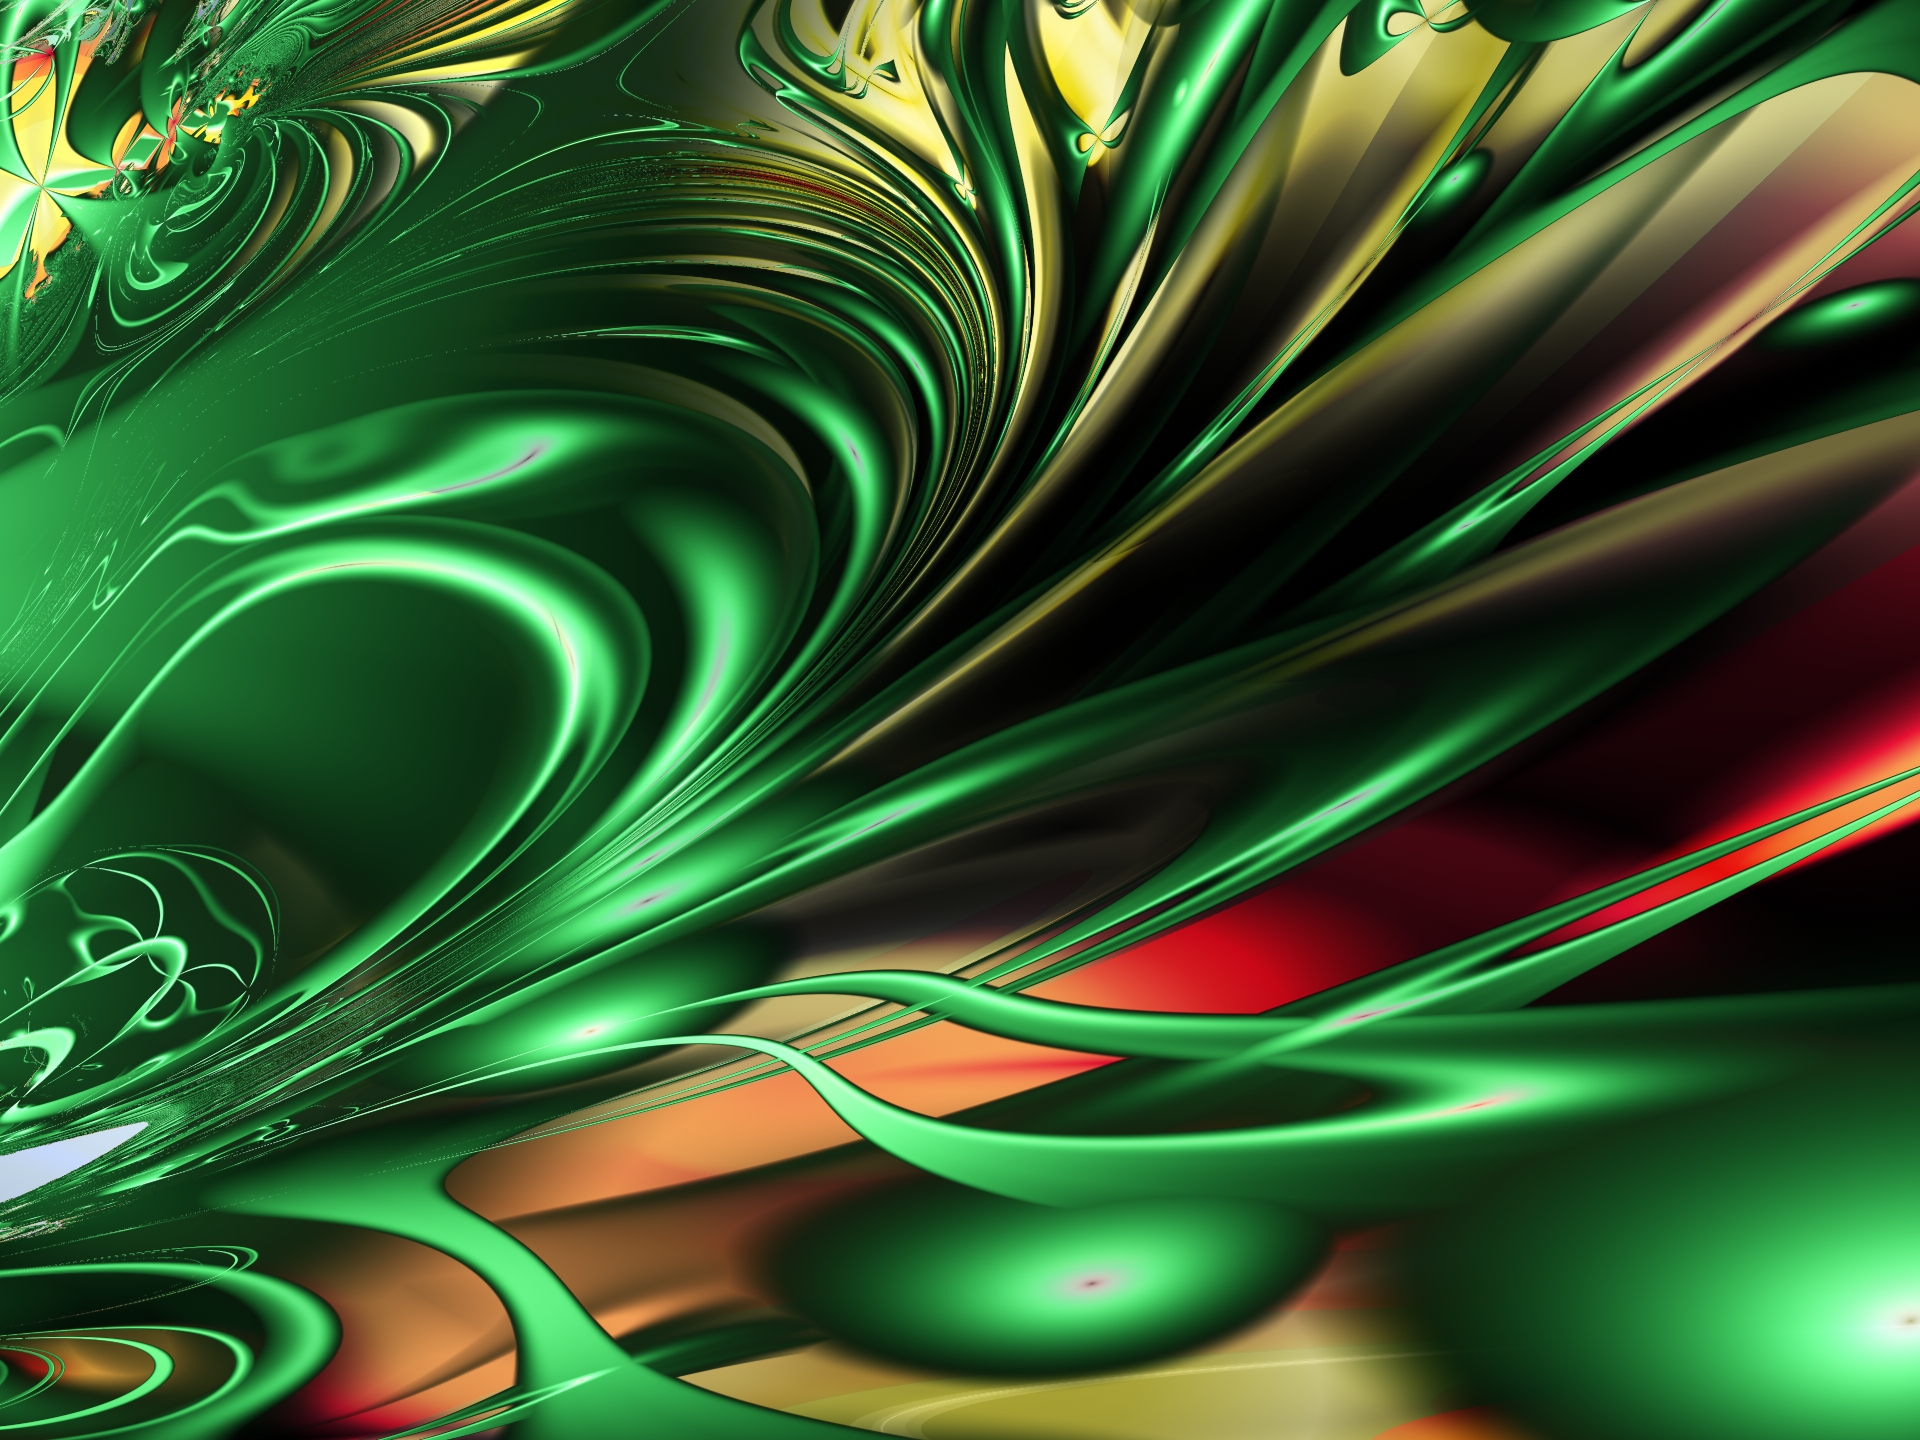 Abstract Fractal Wallpaper Background Pictures To Like Or Share